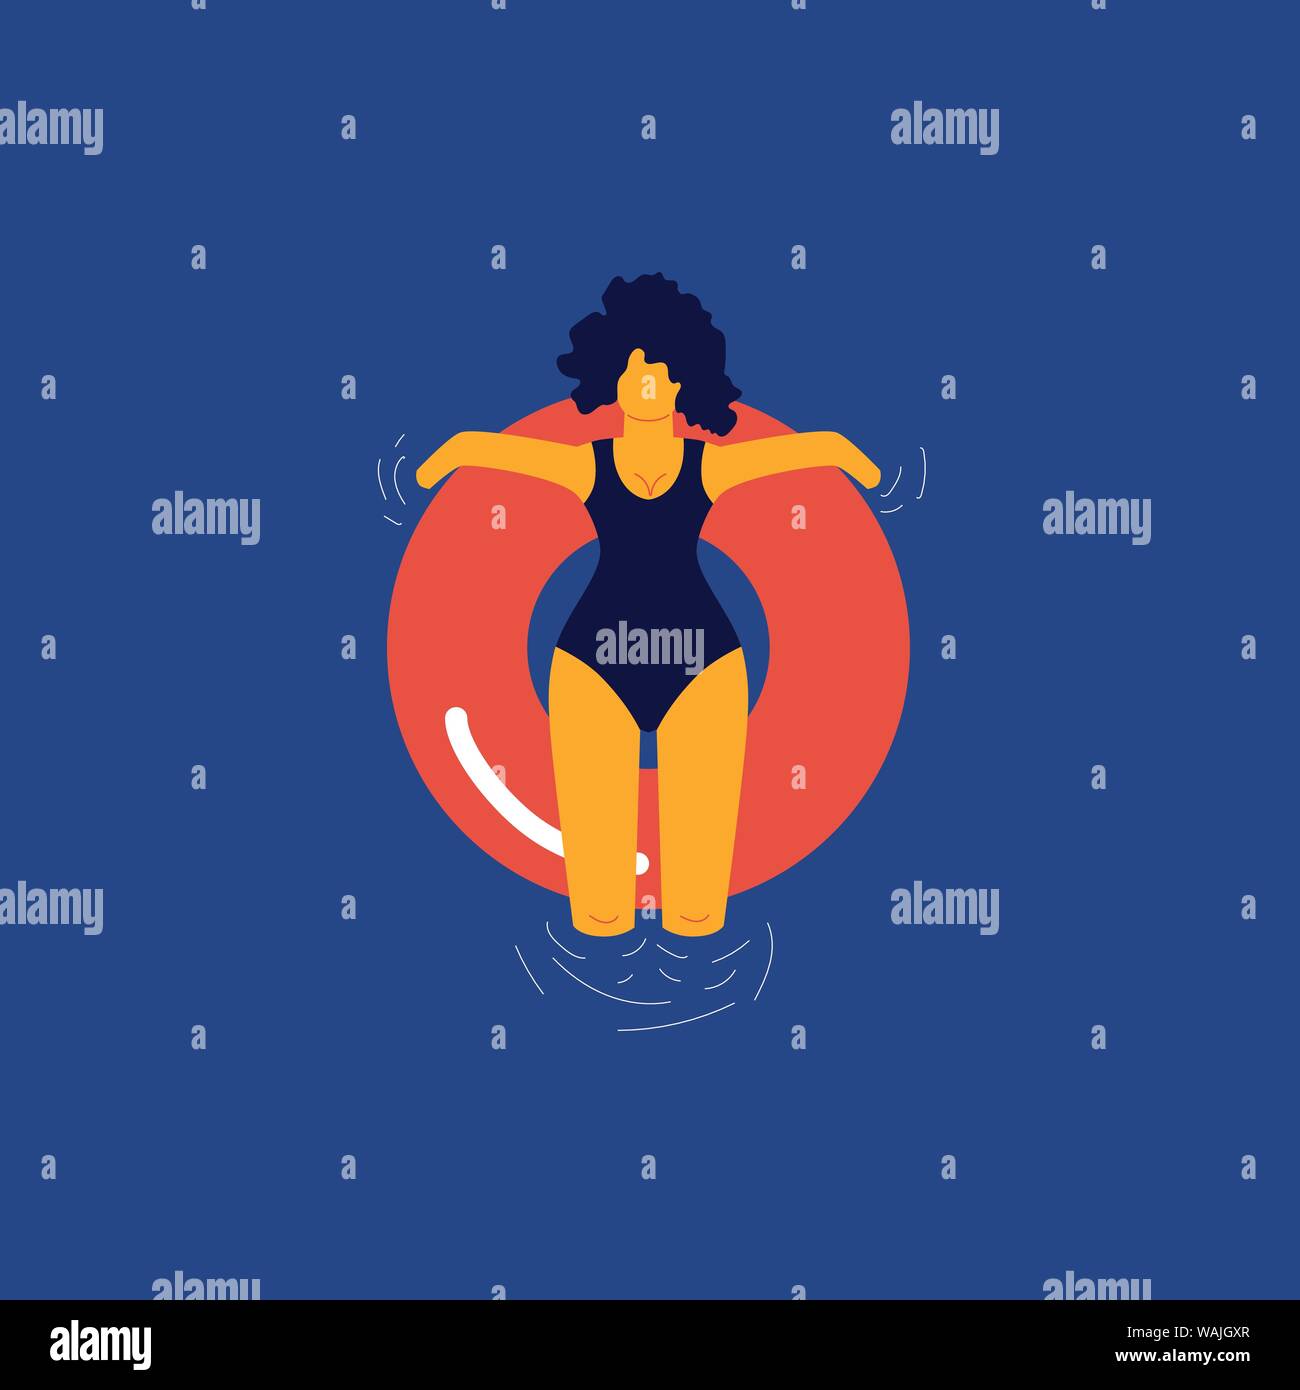 Woman floating relaxing on the red rubber ring Stock Vector